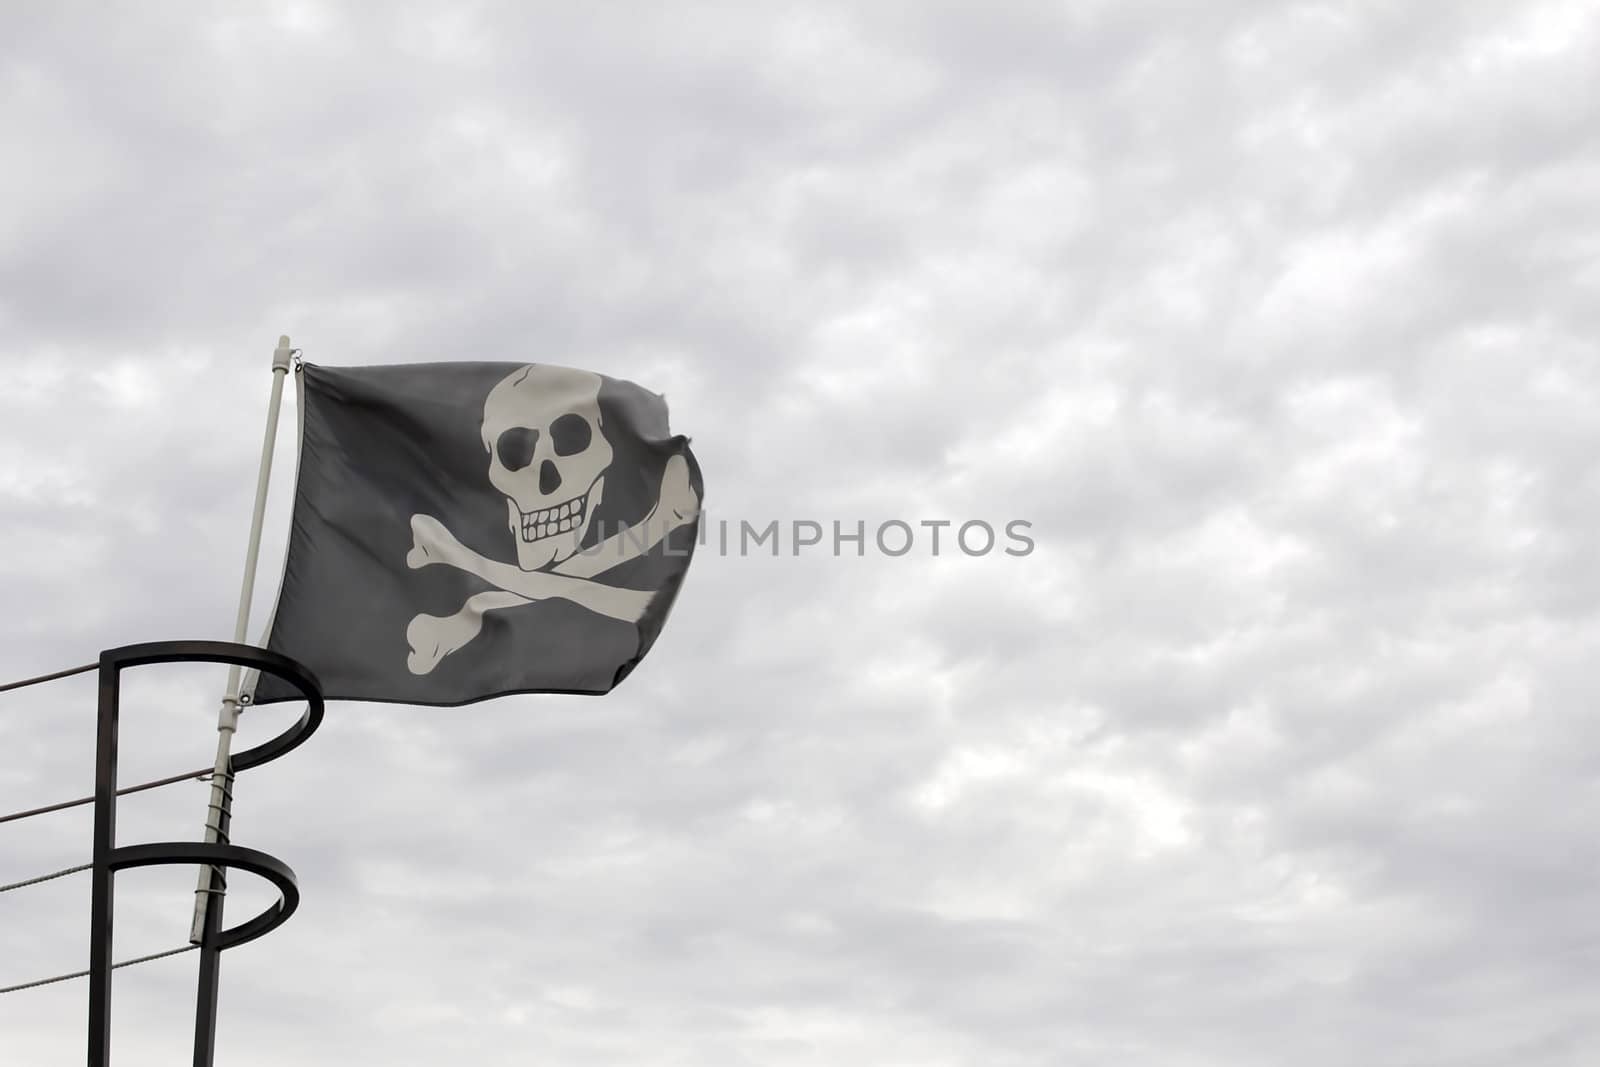 Pirate Ship Jolly Roger Skull with Crossbones Flag against Cloudy Sky Background